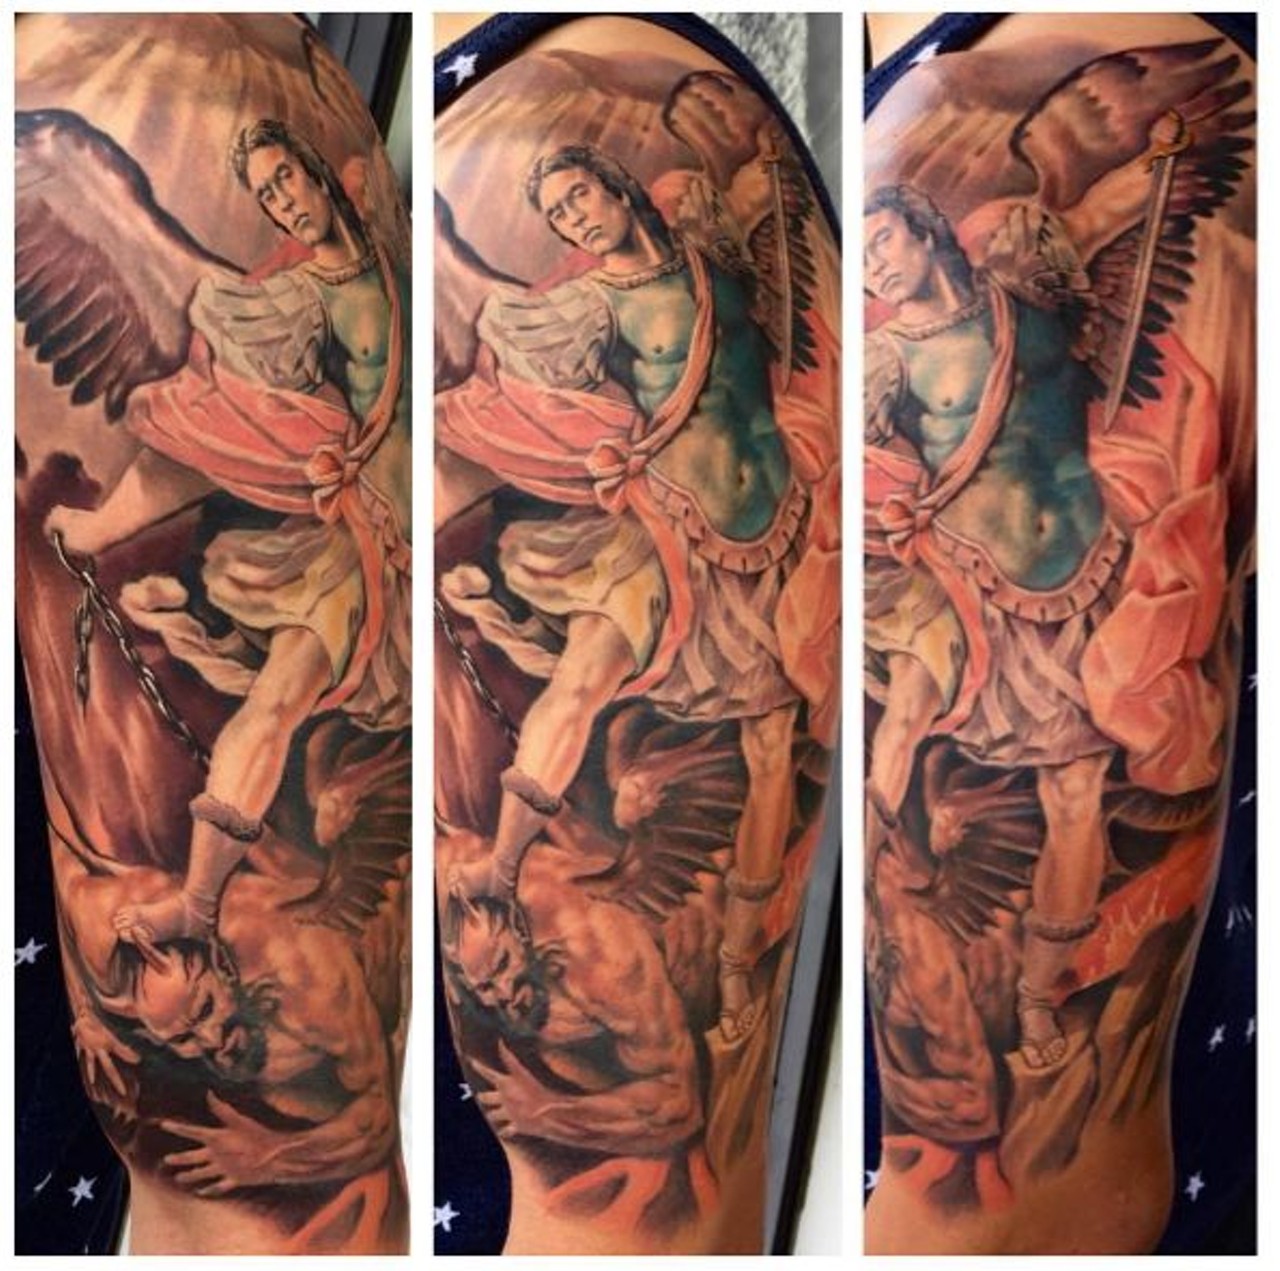 Manny Garcia, @x_squ1d_x
Firme Copias Tattoo Shop, 1132 Rayburn Dr., (210) 560-1570
On this slideshow, we&#146;ve only given you a small sampling of Garcia&#146;s vast and impressive portfolio. He does work in almost every tattoo discipline, and it&#146;s absolutely immaculate. 
Photo via Instagram, x_squ1d_x